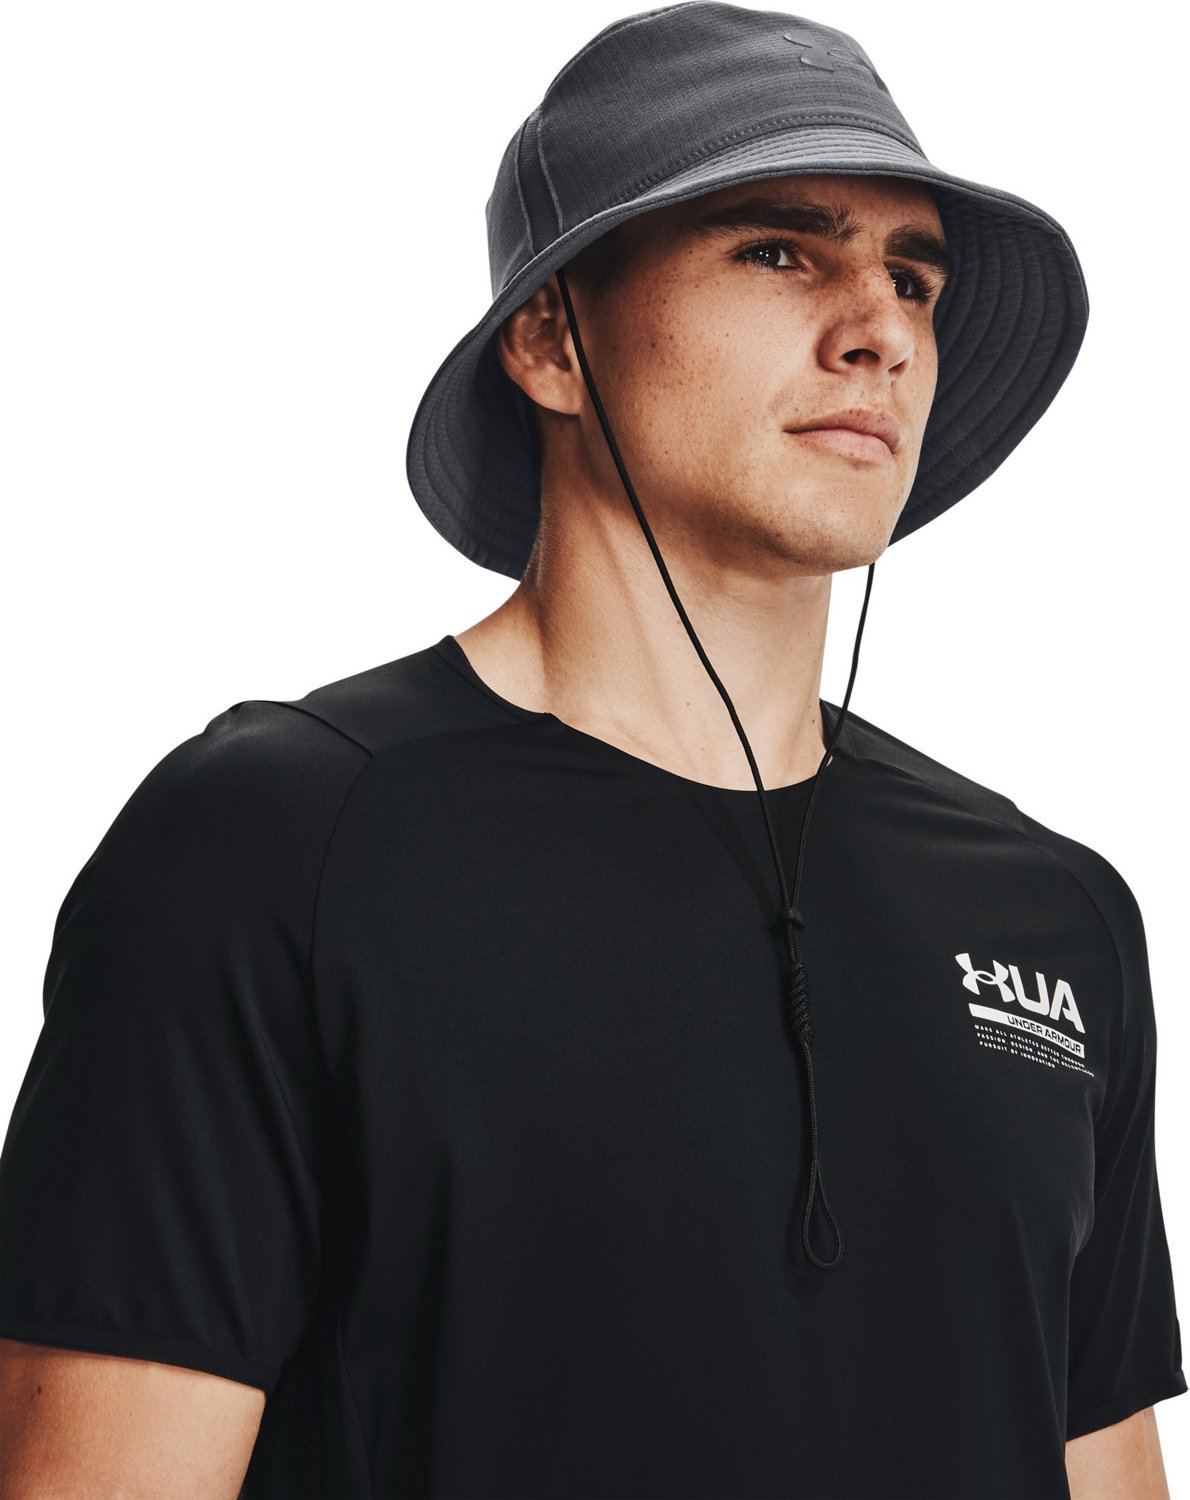 Under Armour Men's Iso-Chill ArmourVent Bucket Hat